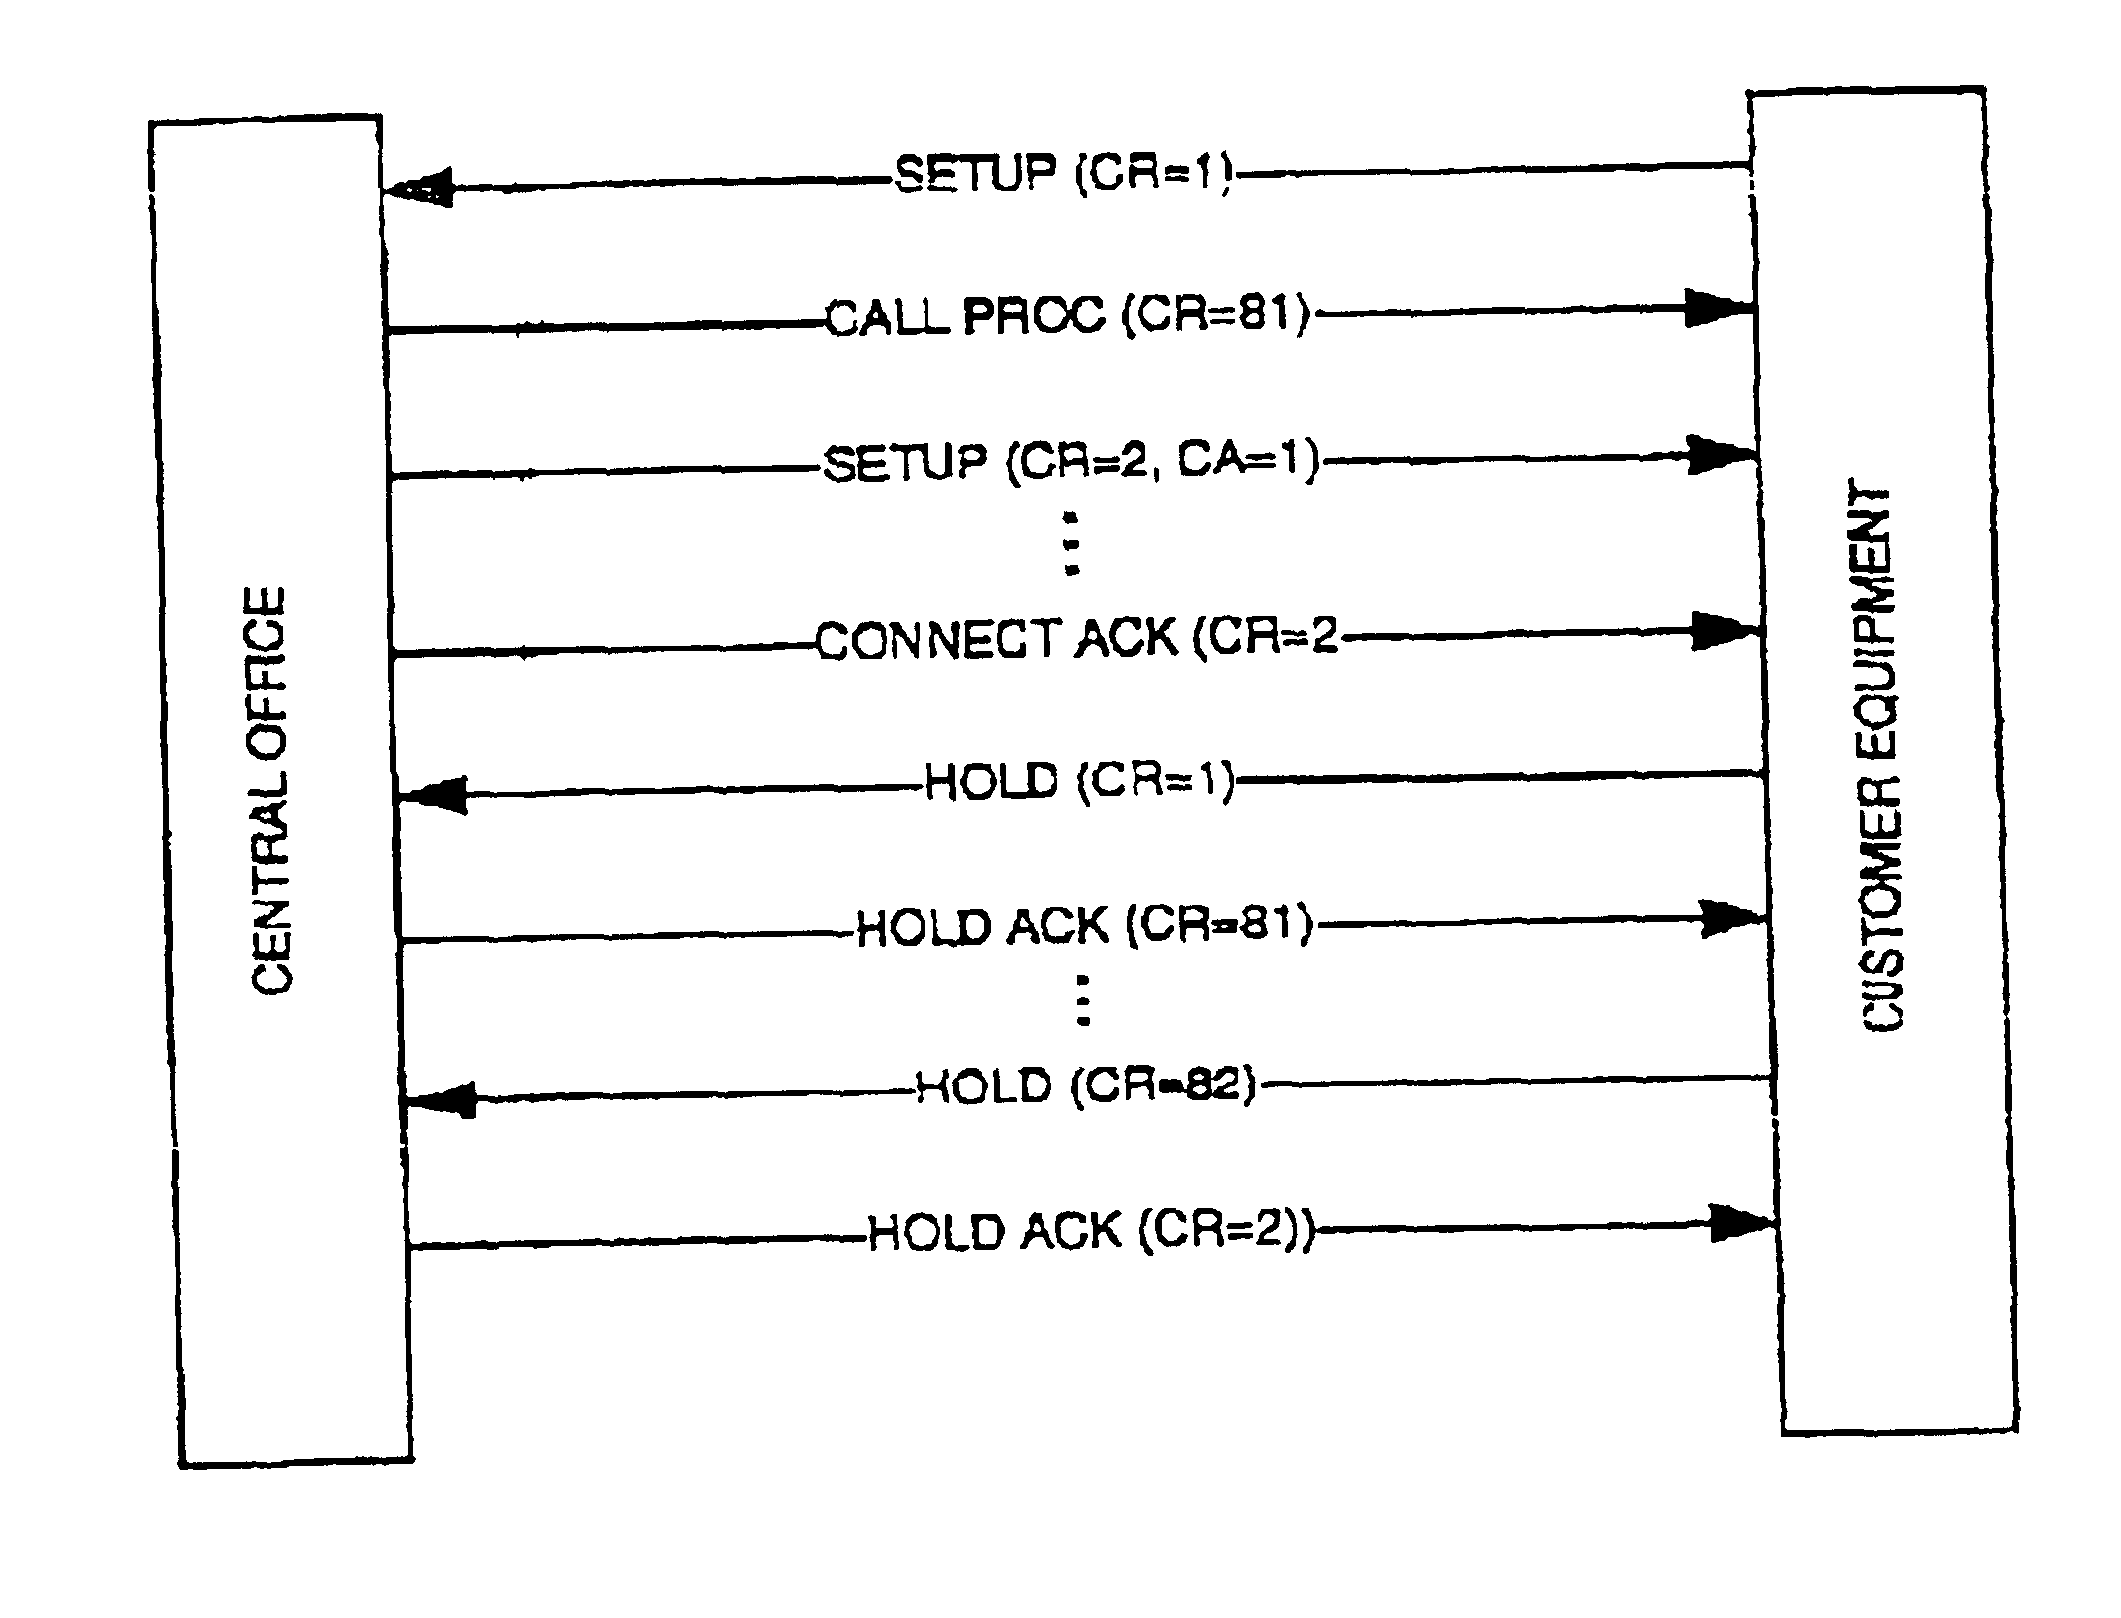 PBX switch incorporating methods and apparatus for automatically detecting call appearance values for each primary directory number on a basic rate interface